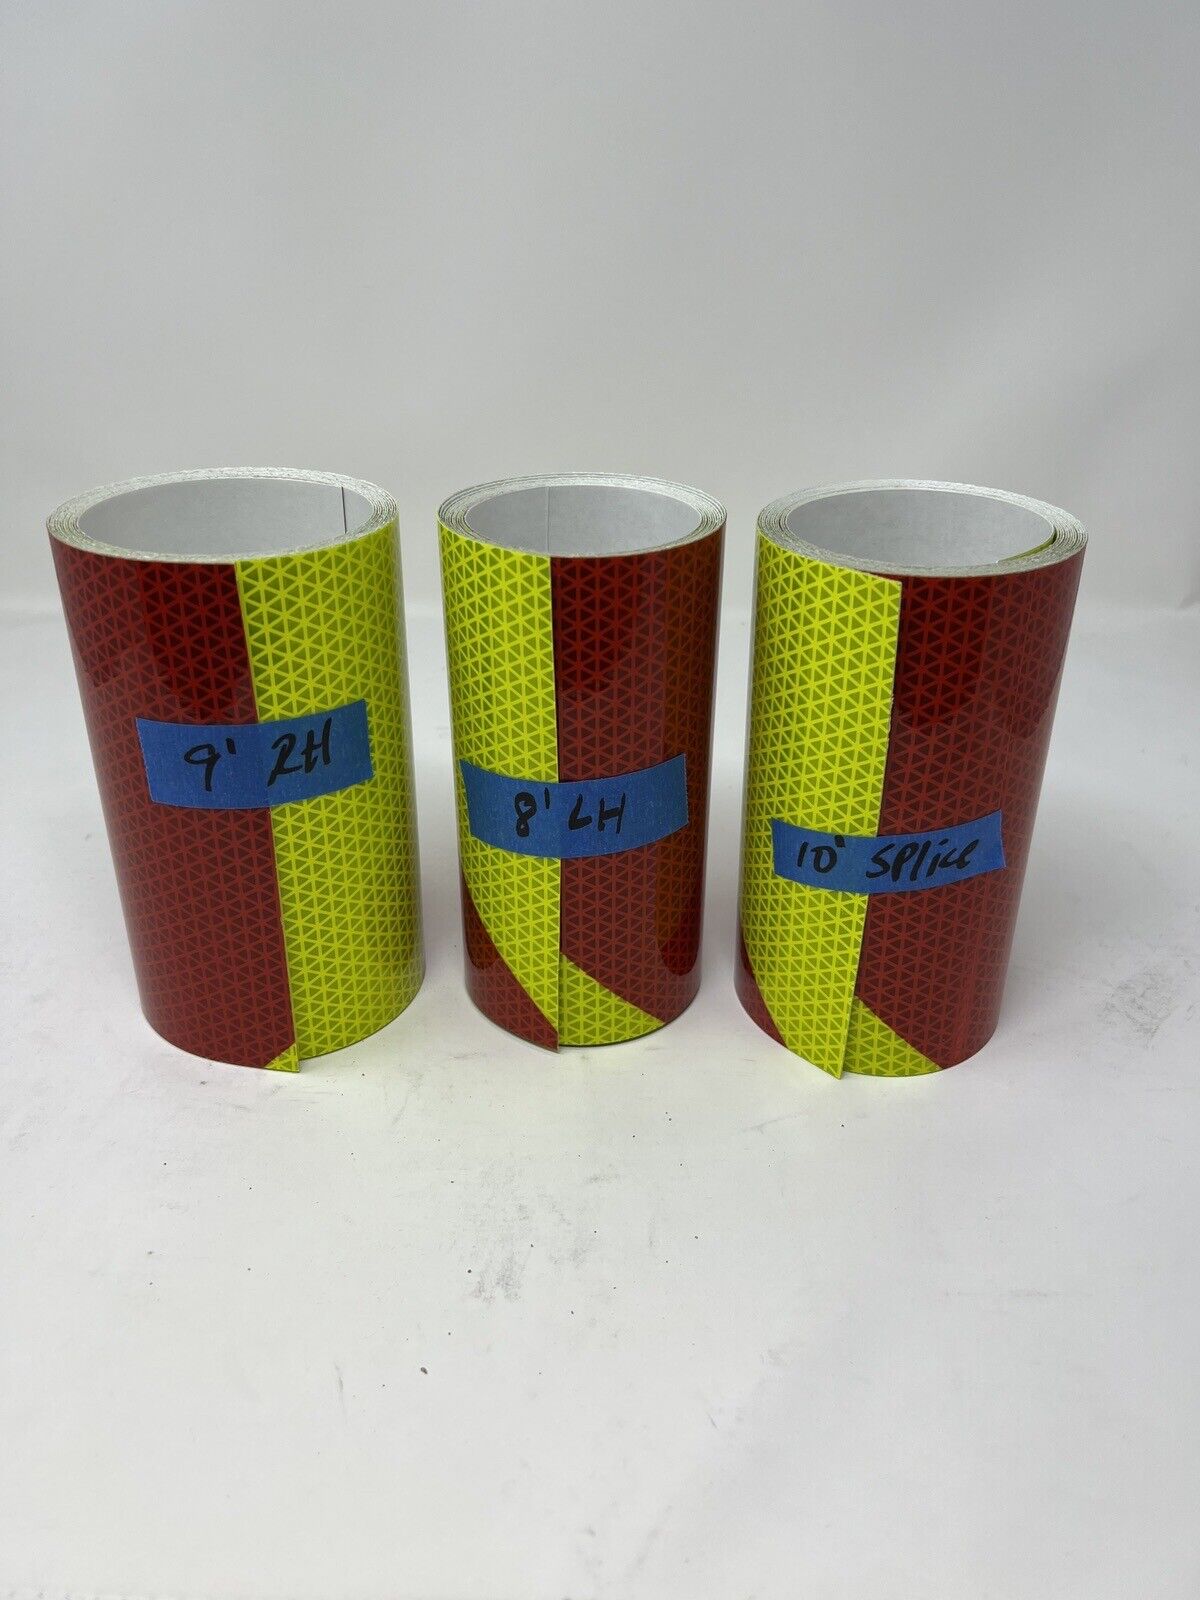 SPECIAL OFFER - Lot of 3 Off Cut Partial Rolls - 6" V98 Conformable Pre-Striped Chevron Fluorescent Lime / Red Reflective Tape - See Description for Sizes